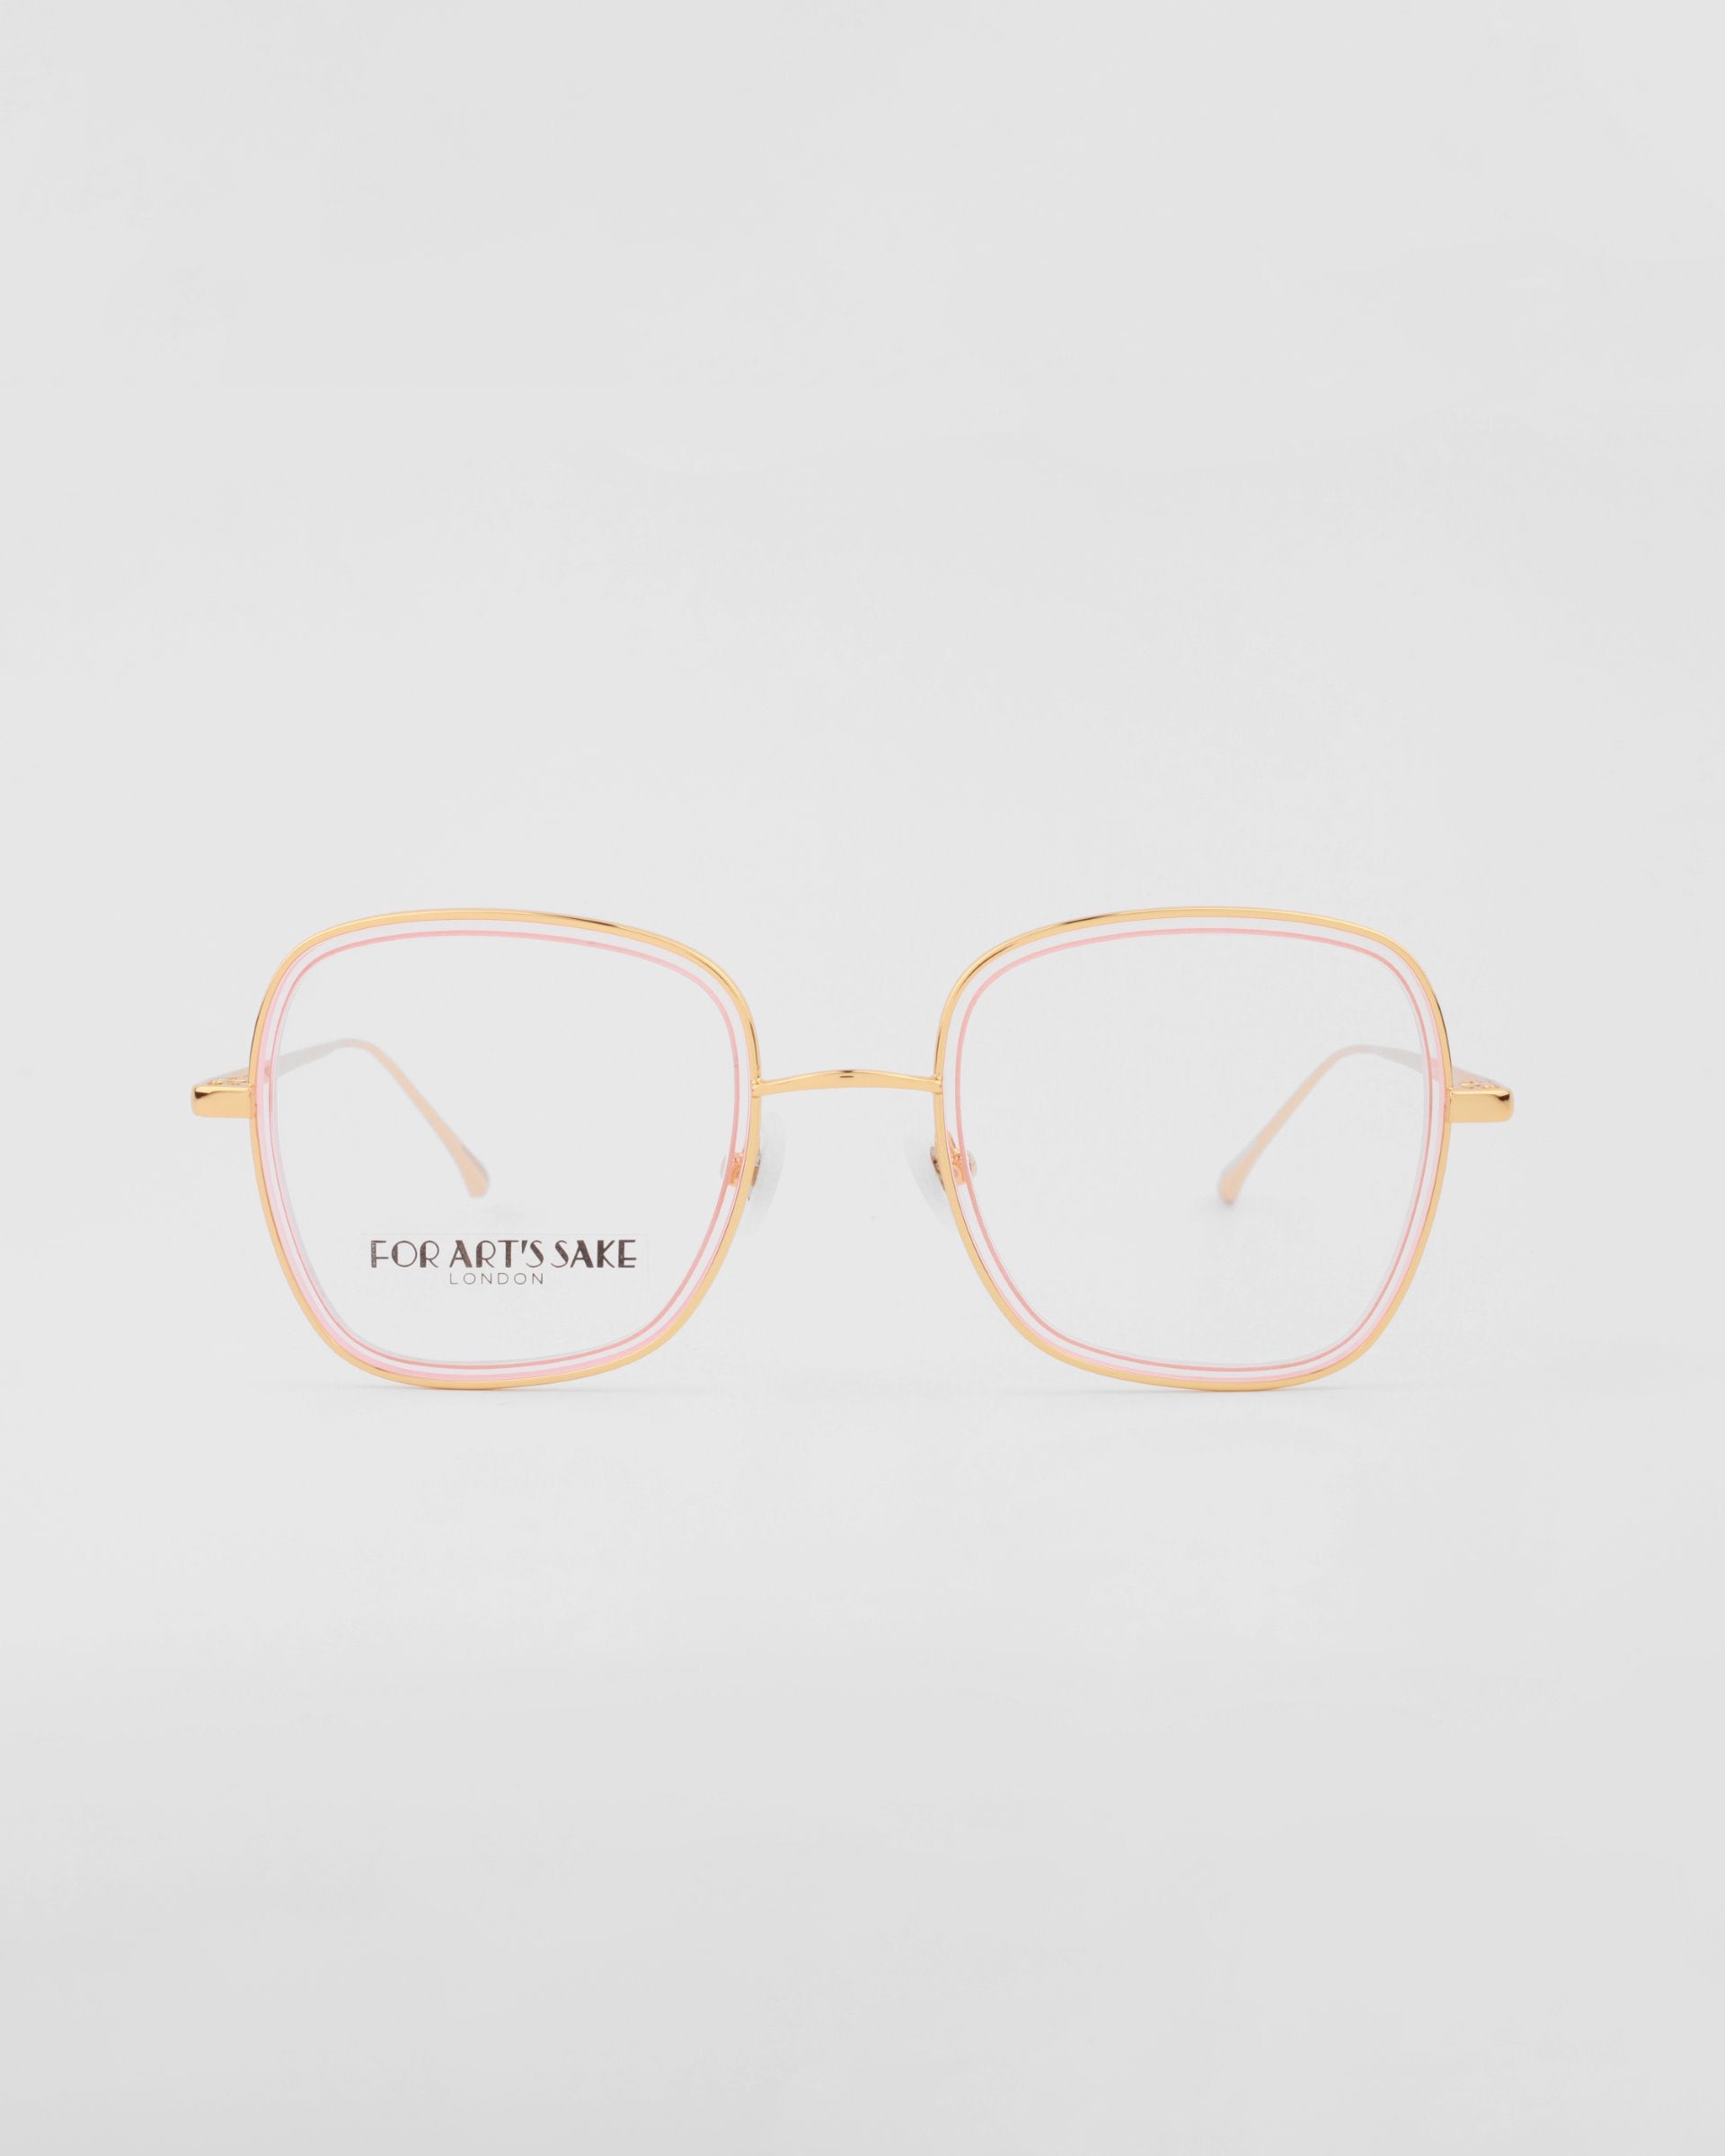 A pair of eyeglasses with thin, 18-karat gold-plated frames and a hint of pink detailing around the rims. The shape of the lenses is a rounded square, equipped with a blue light filter. The brand "For Art's Sake®" is printed on the left lens. The background is white. This stylish accessory is named Coconut by For Art's Sake®.